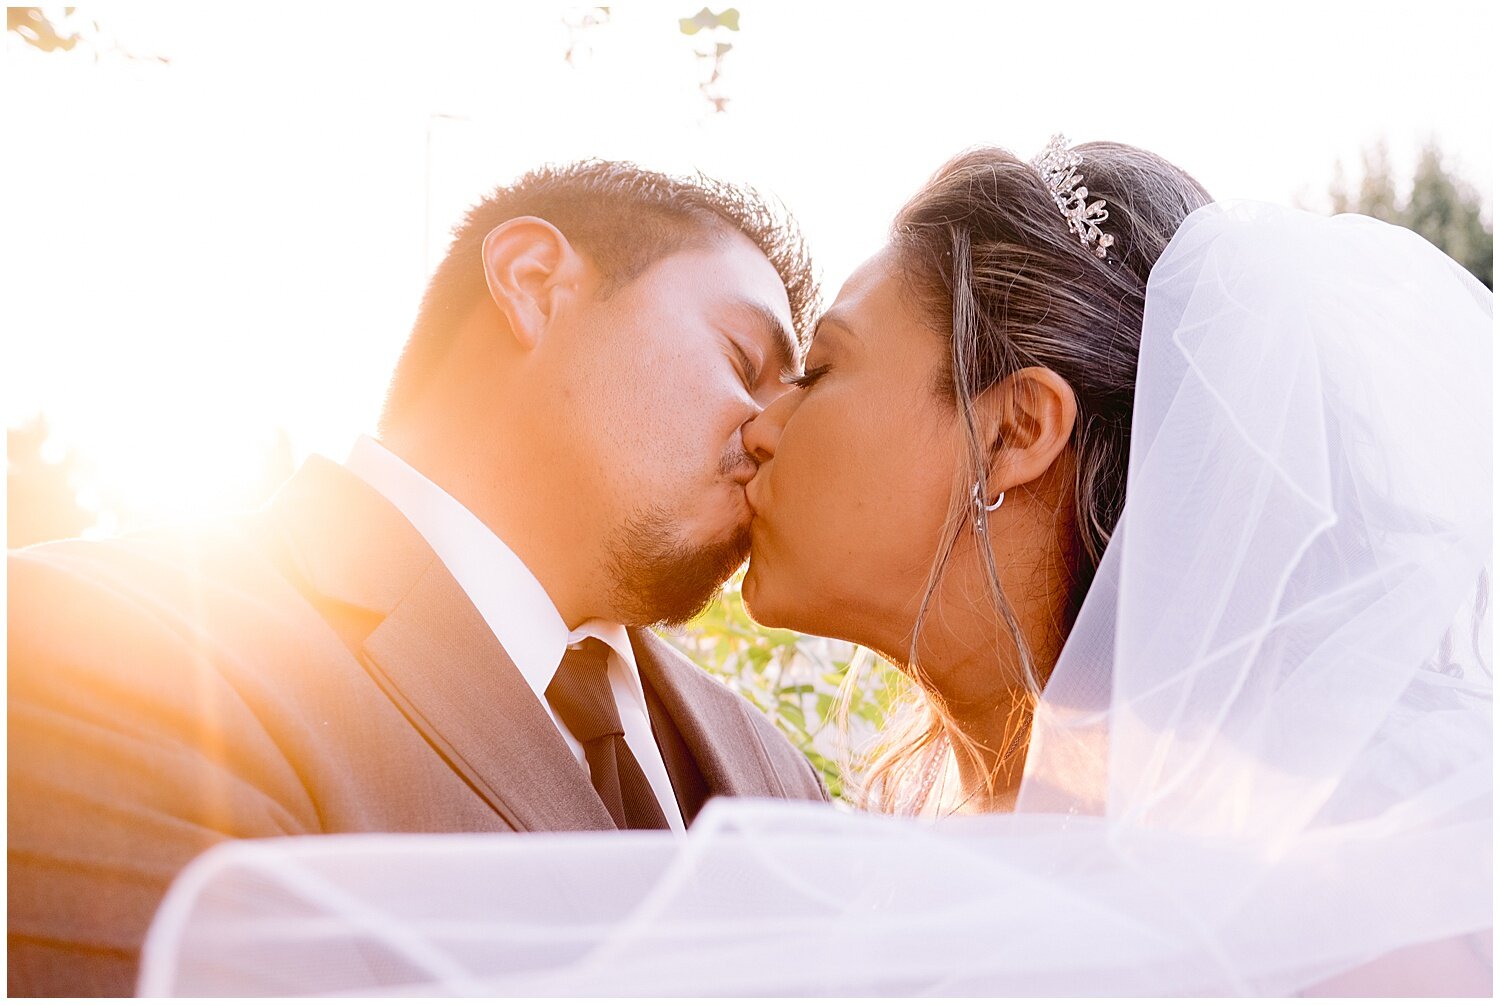 How many hours of wedding photography do you really need